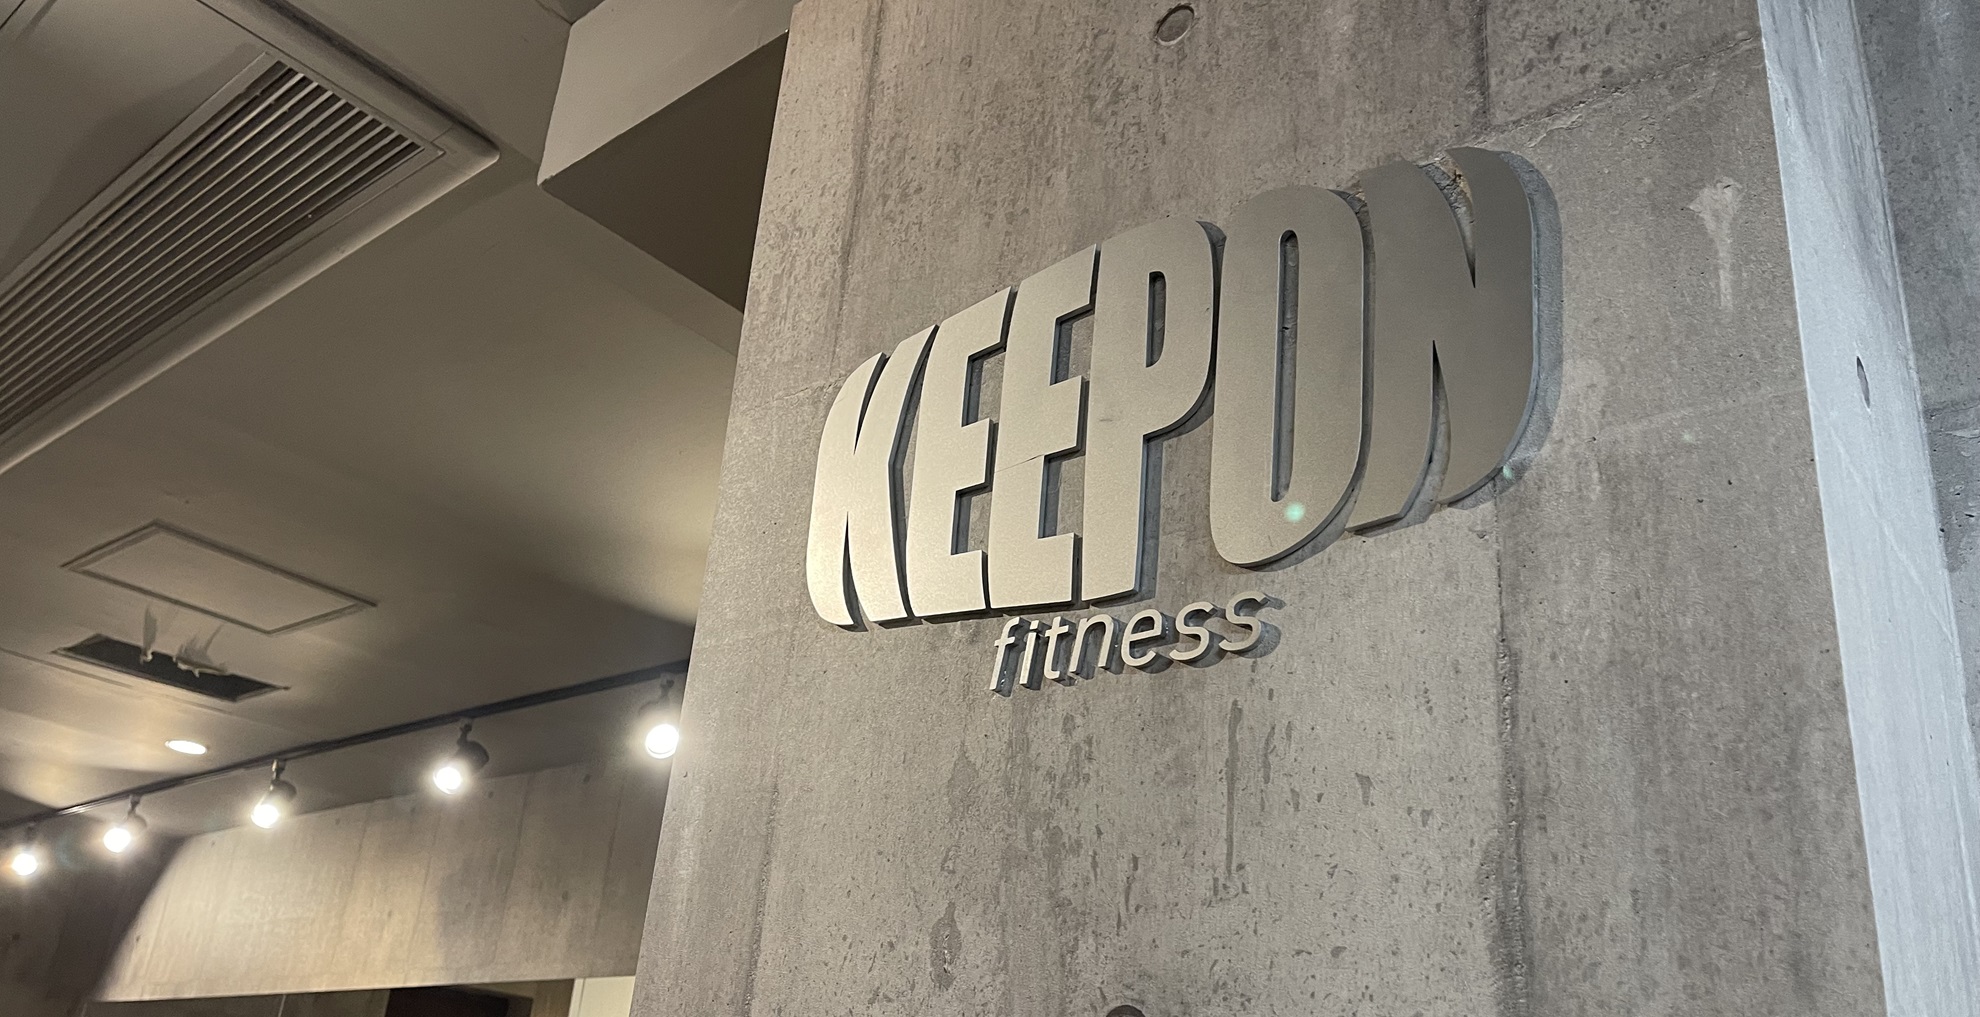 KEEP ON FITNESSトップ